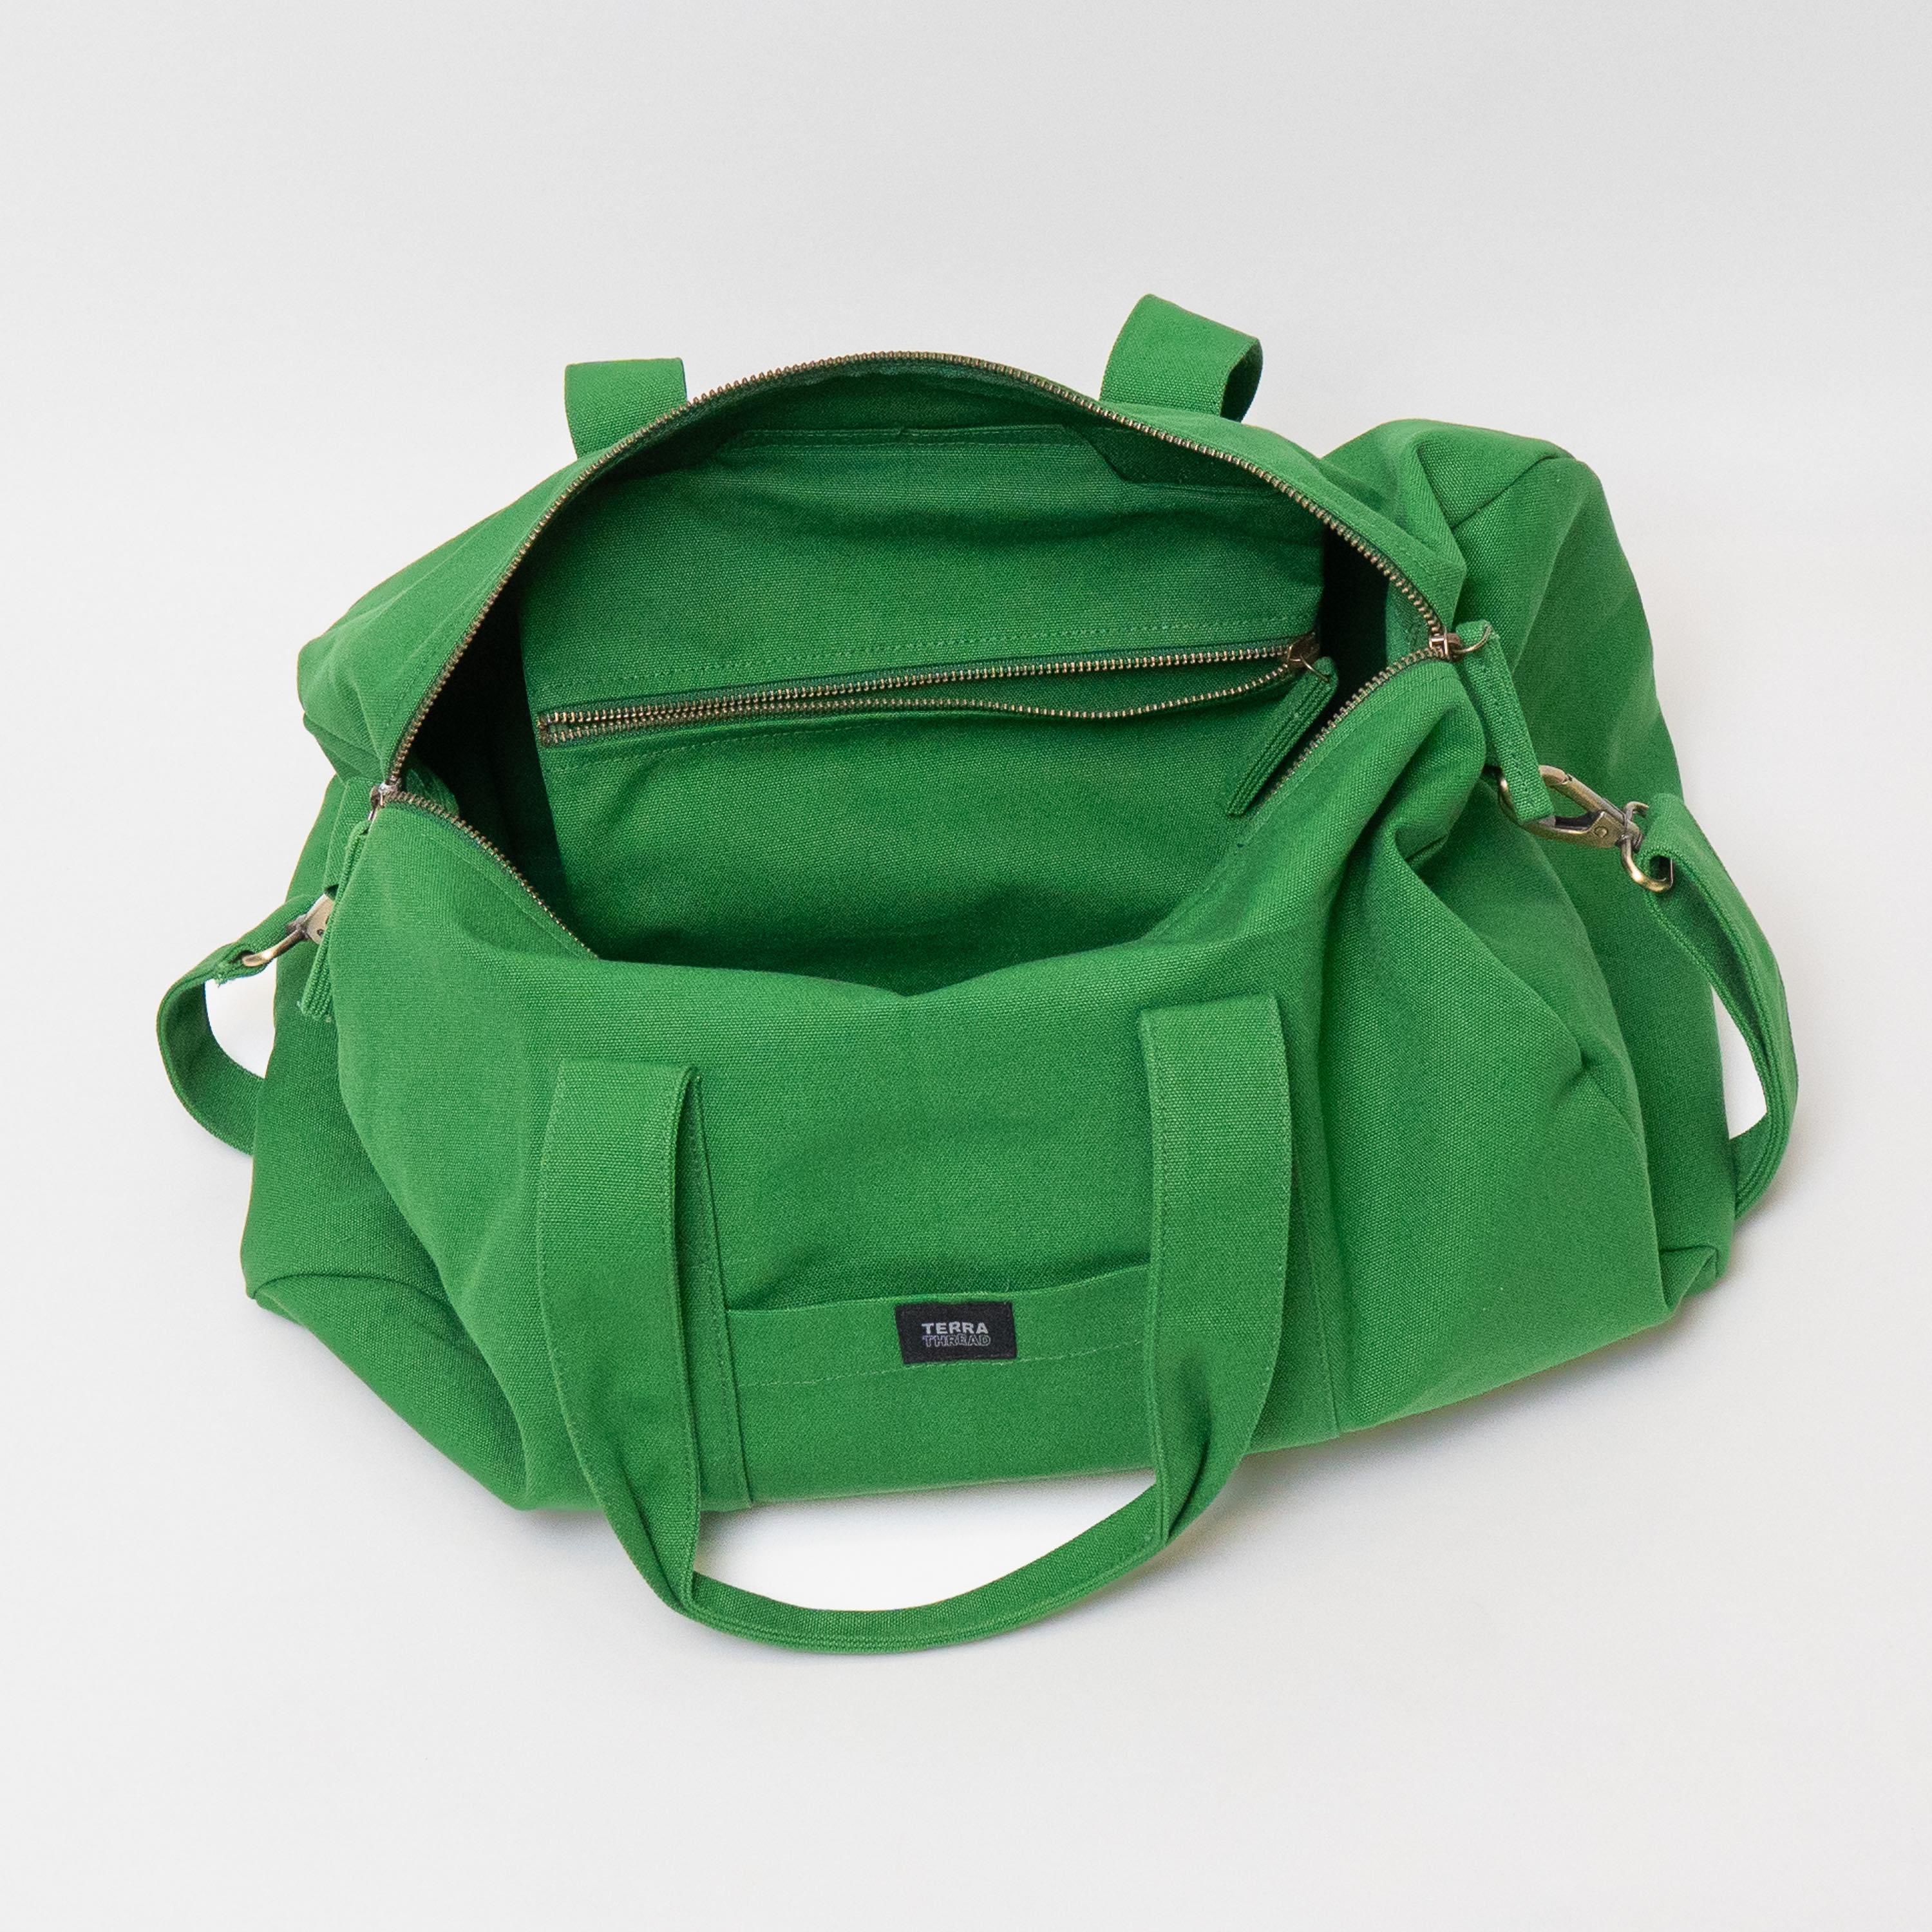 canvas green gym bag with pockets